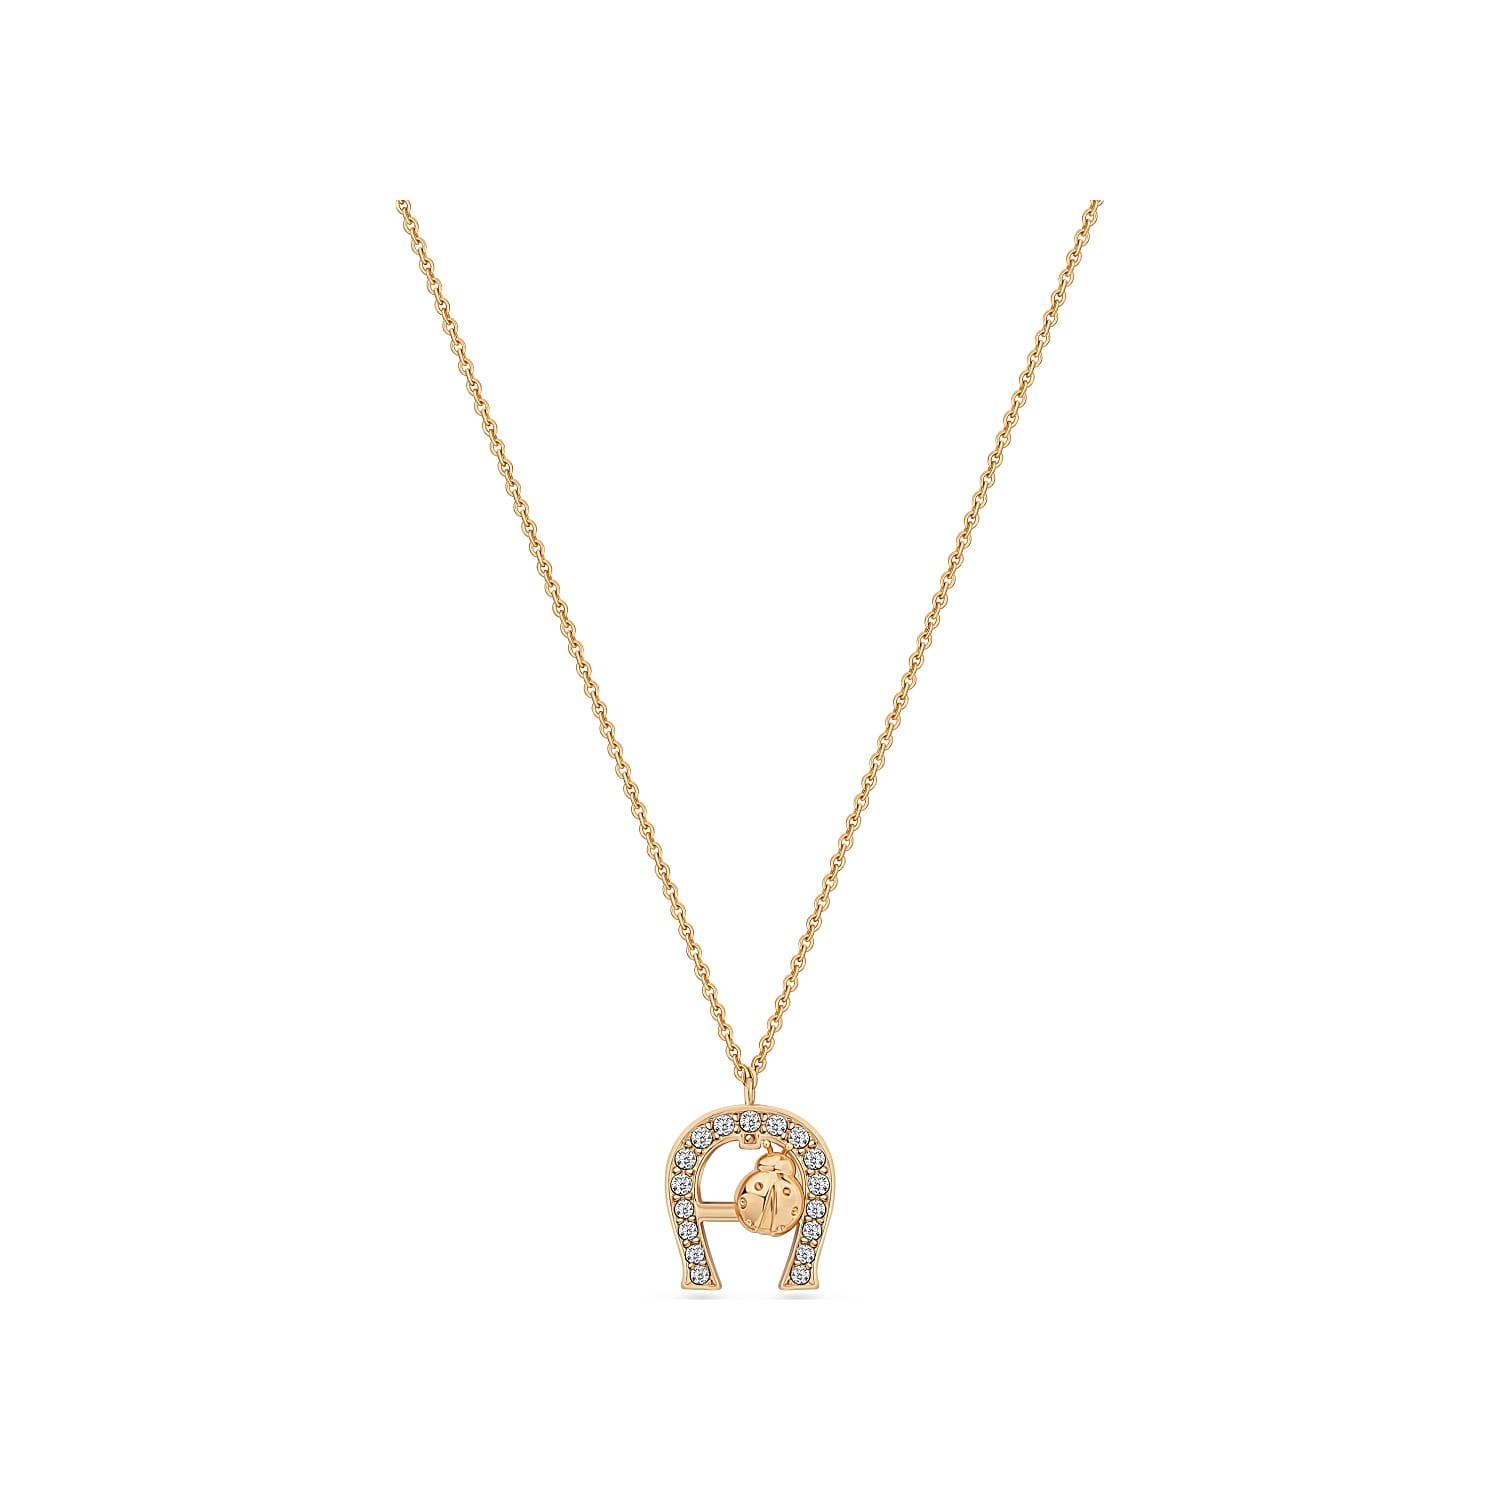 Necklace with A-Logo and ladybug rose gold